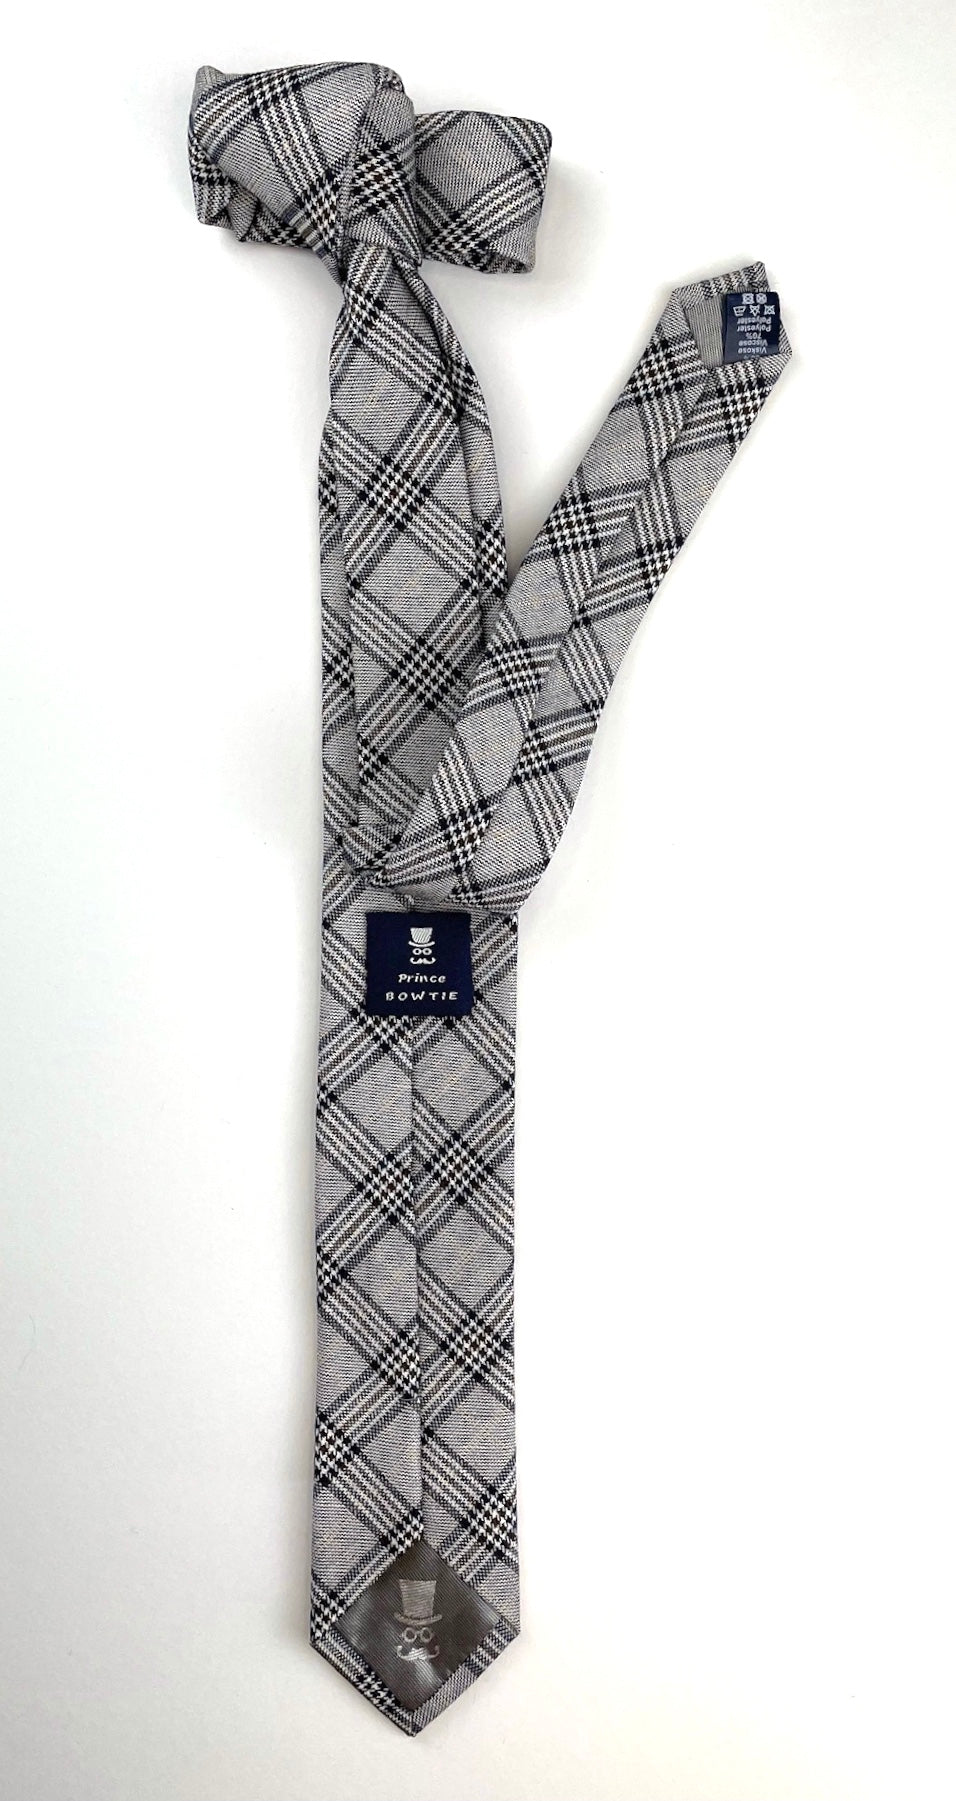 Tie with an elegant check design